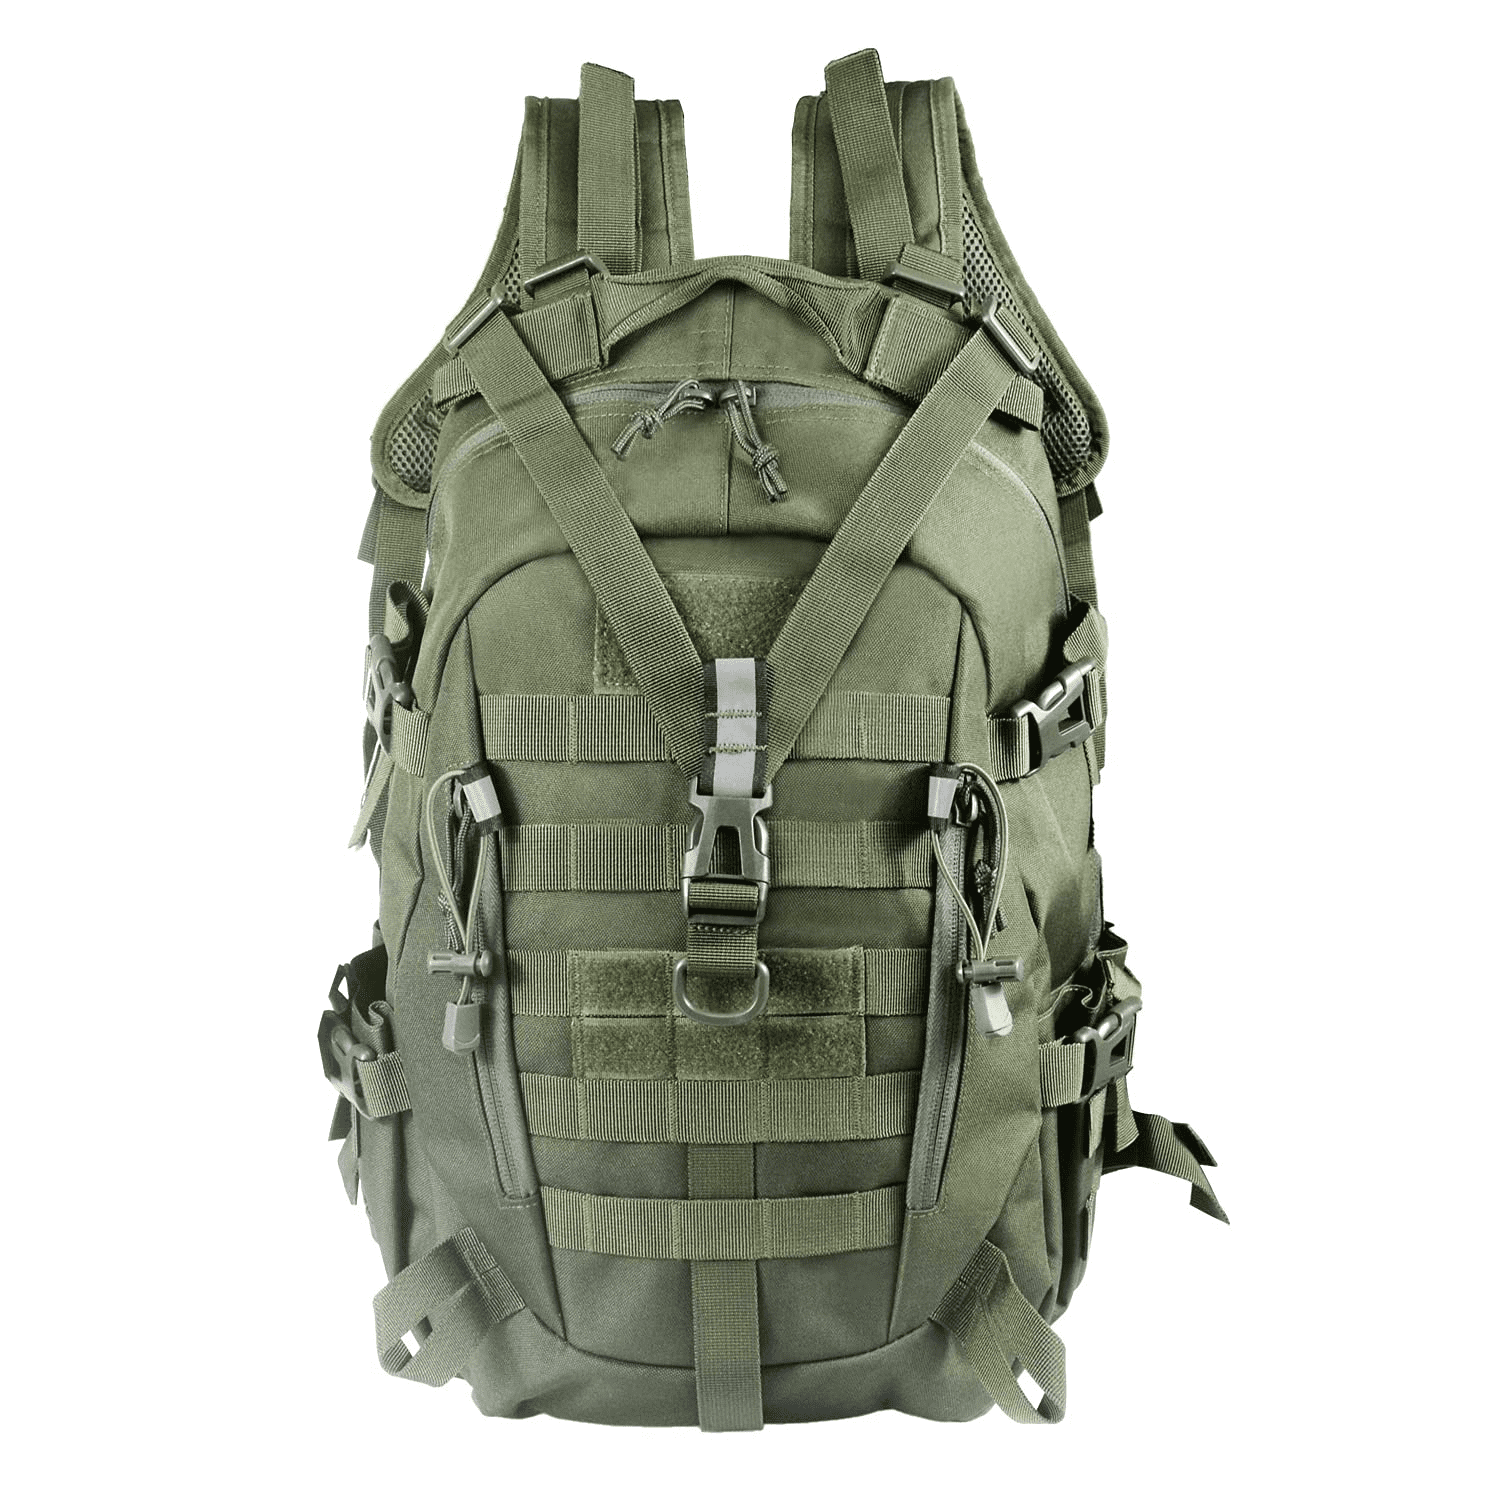 LHI Tactical Military Backpack for Men and Women 25L/35L Army Assault Pack  Bag Small Rucksack with Bottle Holder